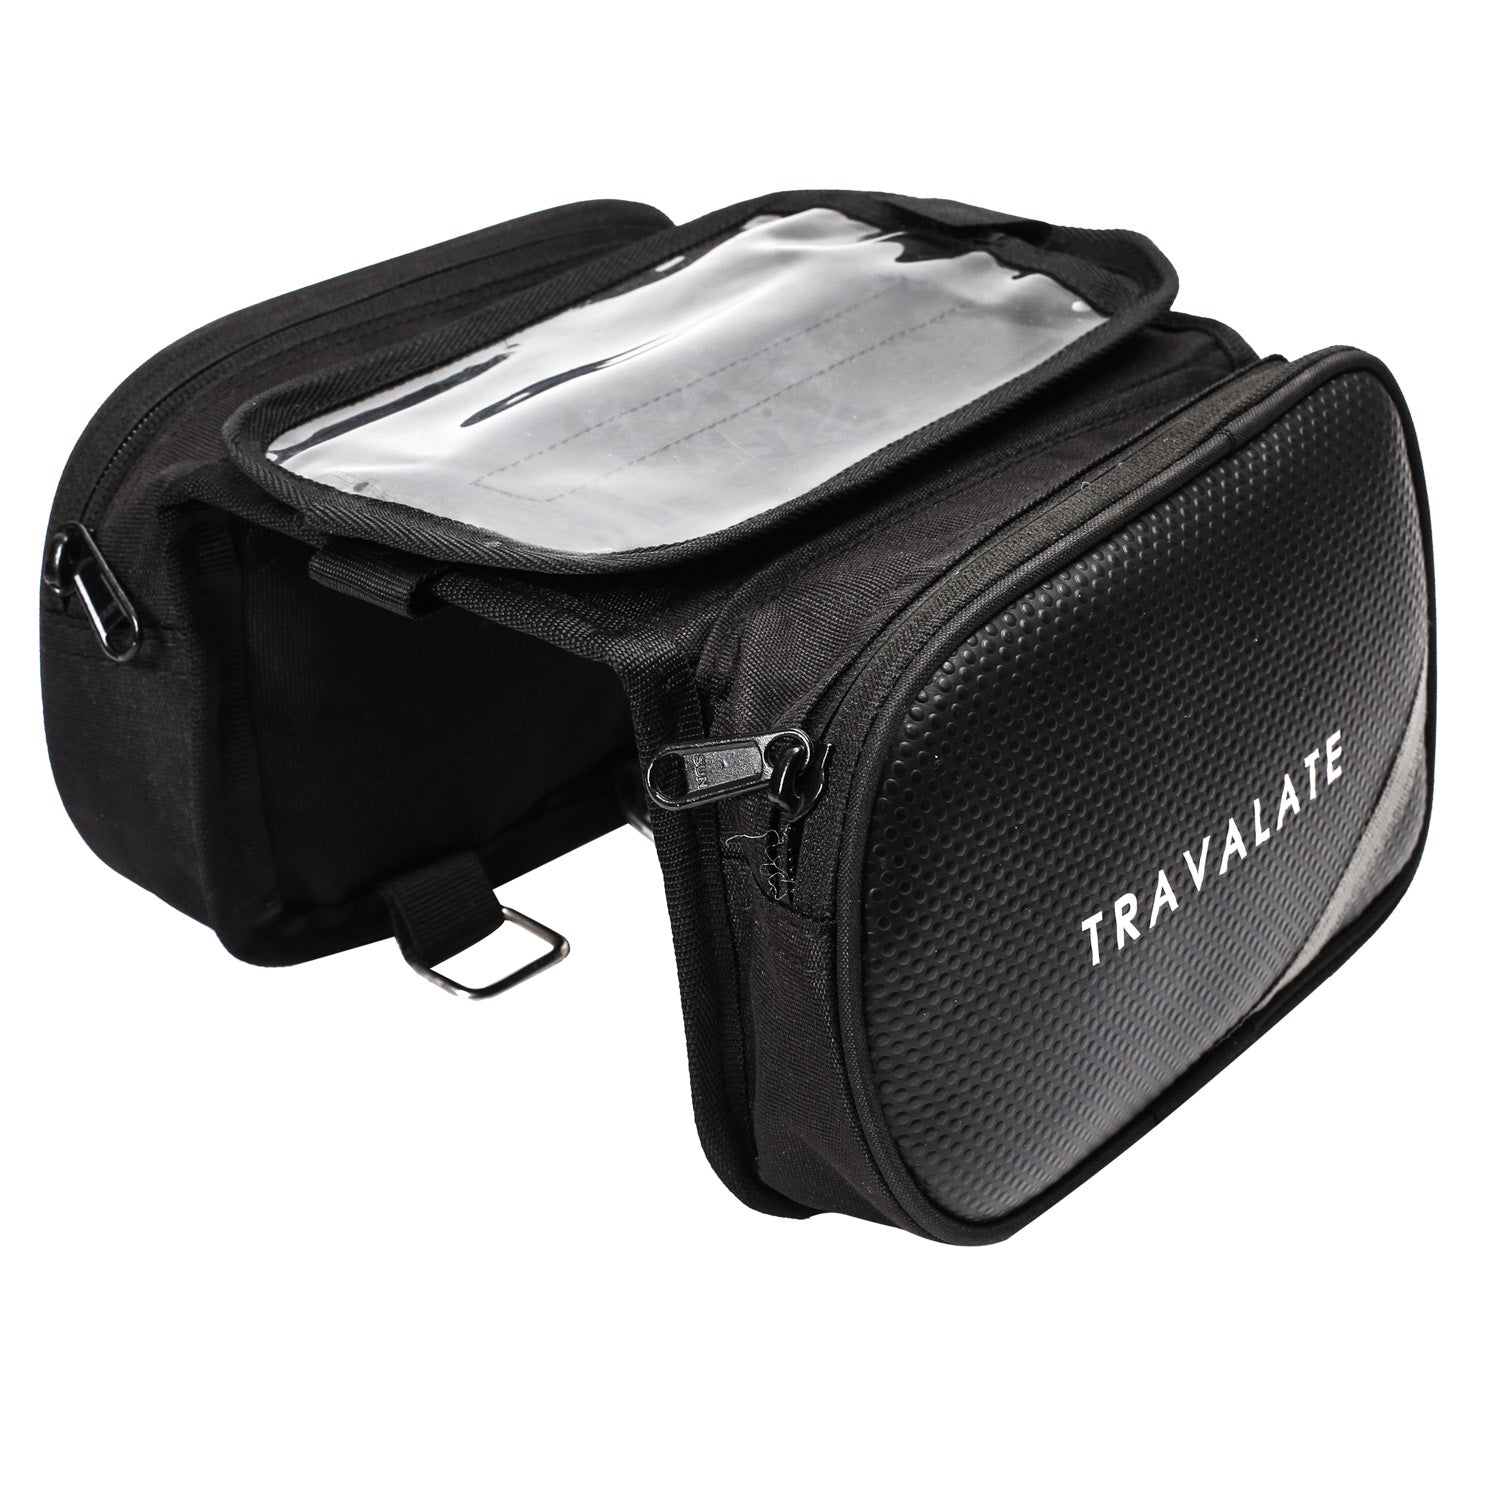 Double Sided Frame Bicycle Bag | Black